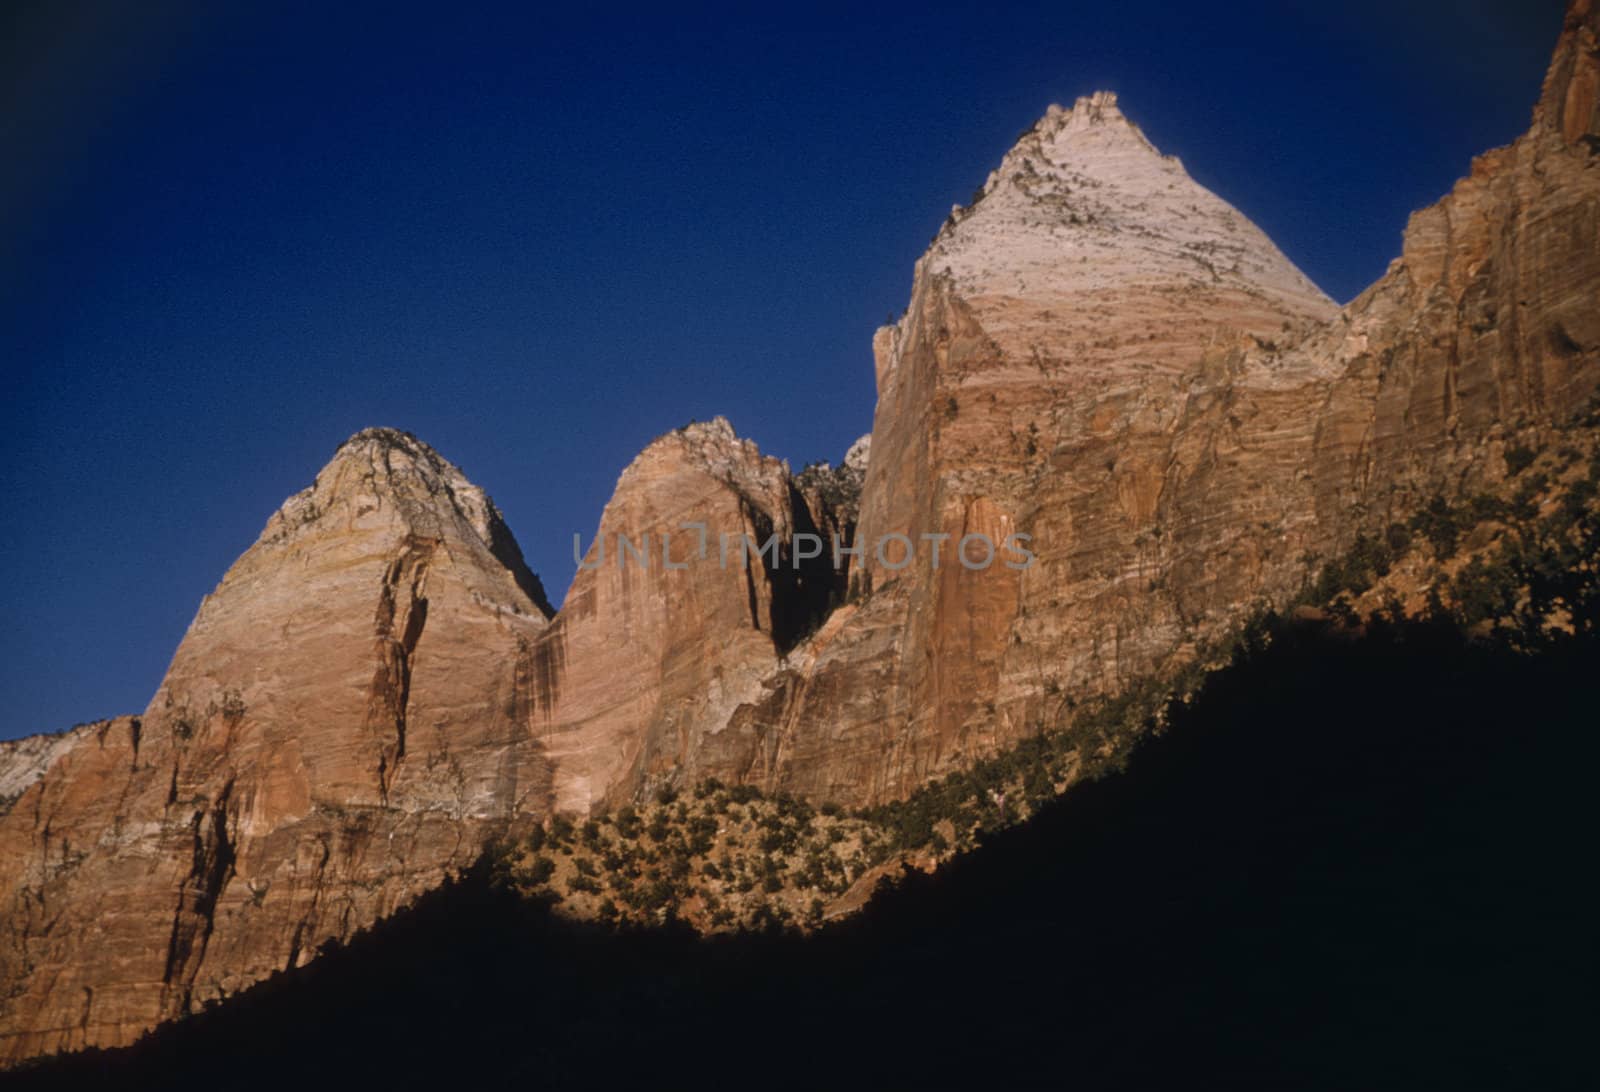 Sandstone cliffs and Rocky Mountains in Zion National Park, Utah